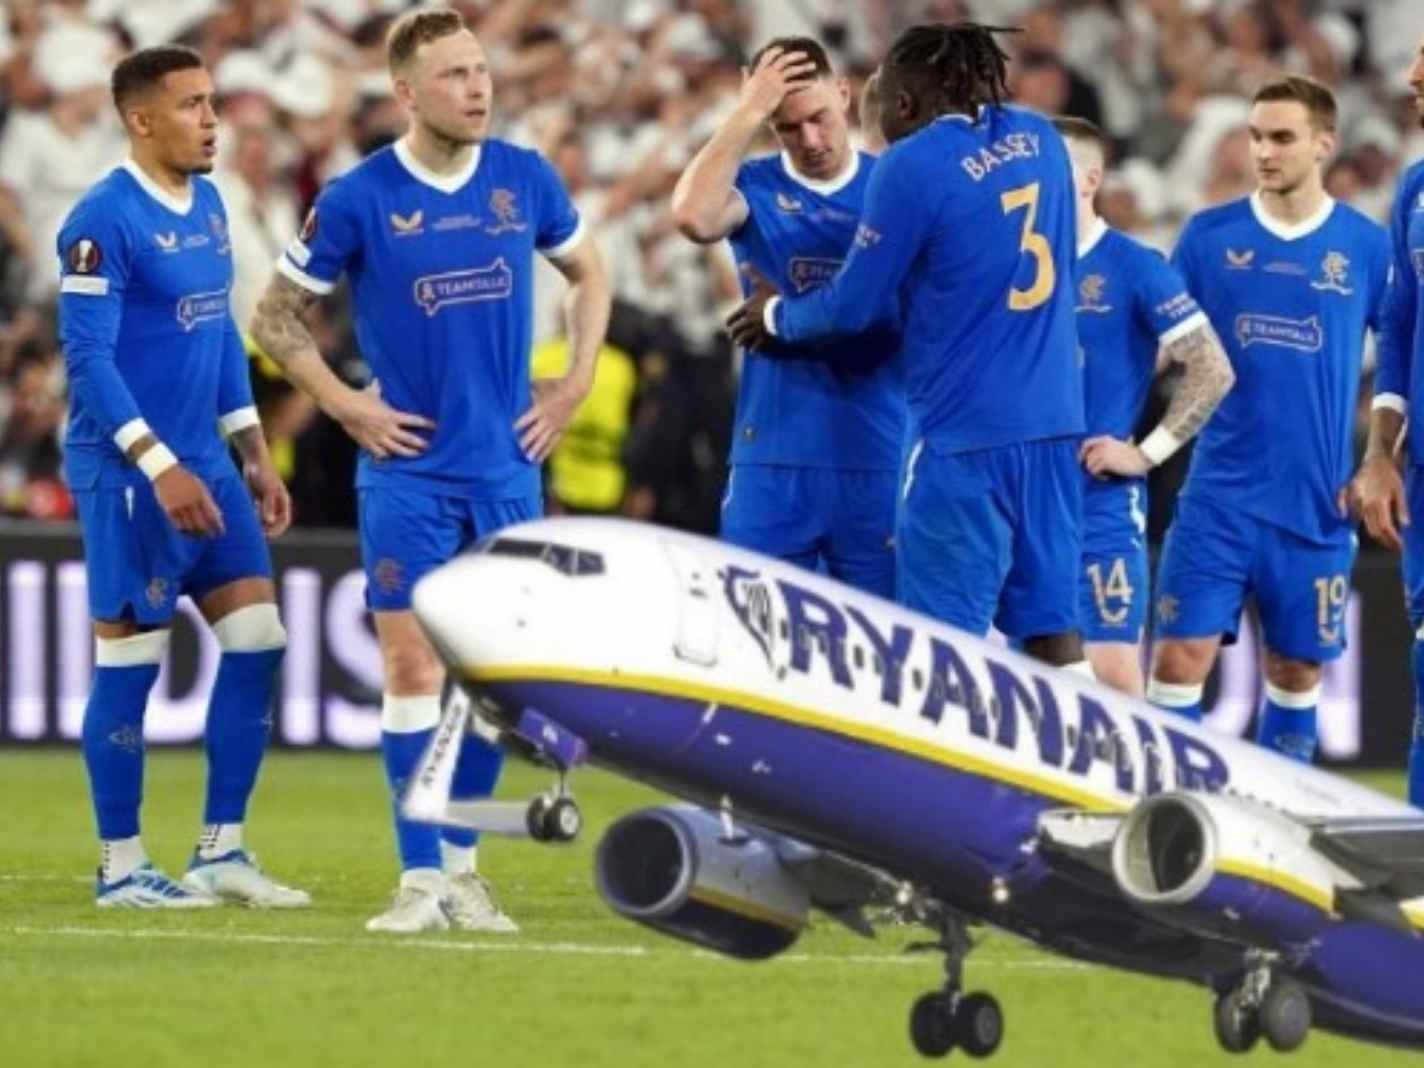 How Ryanair went trashtweeting Rangers after Europa League defeat